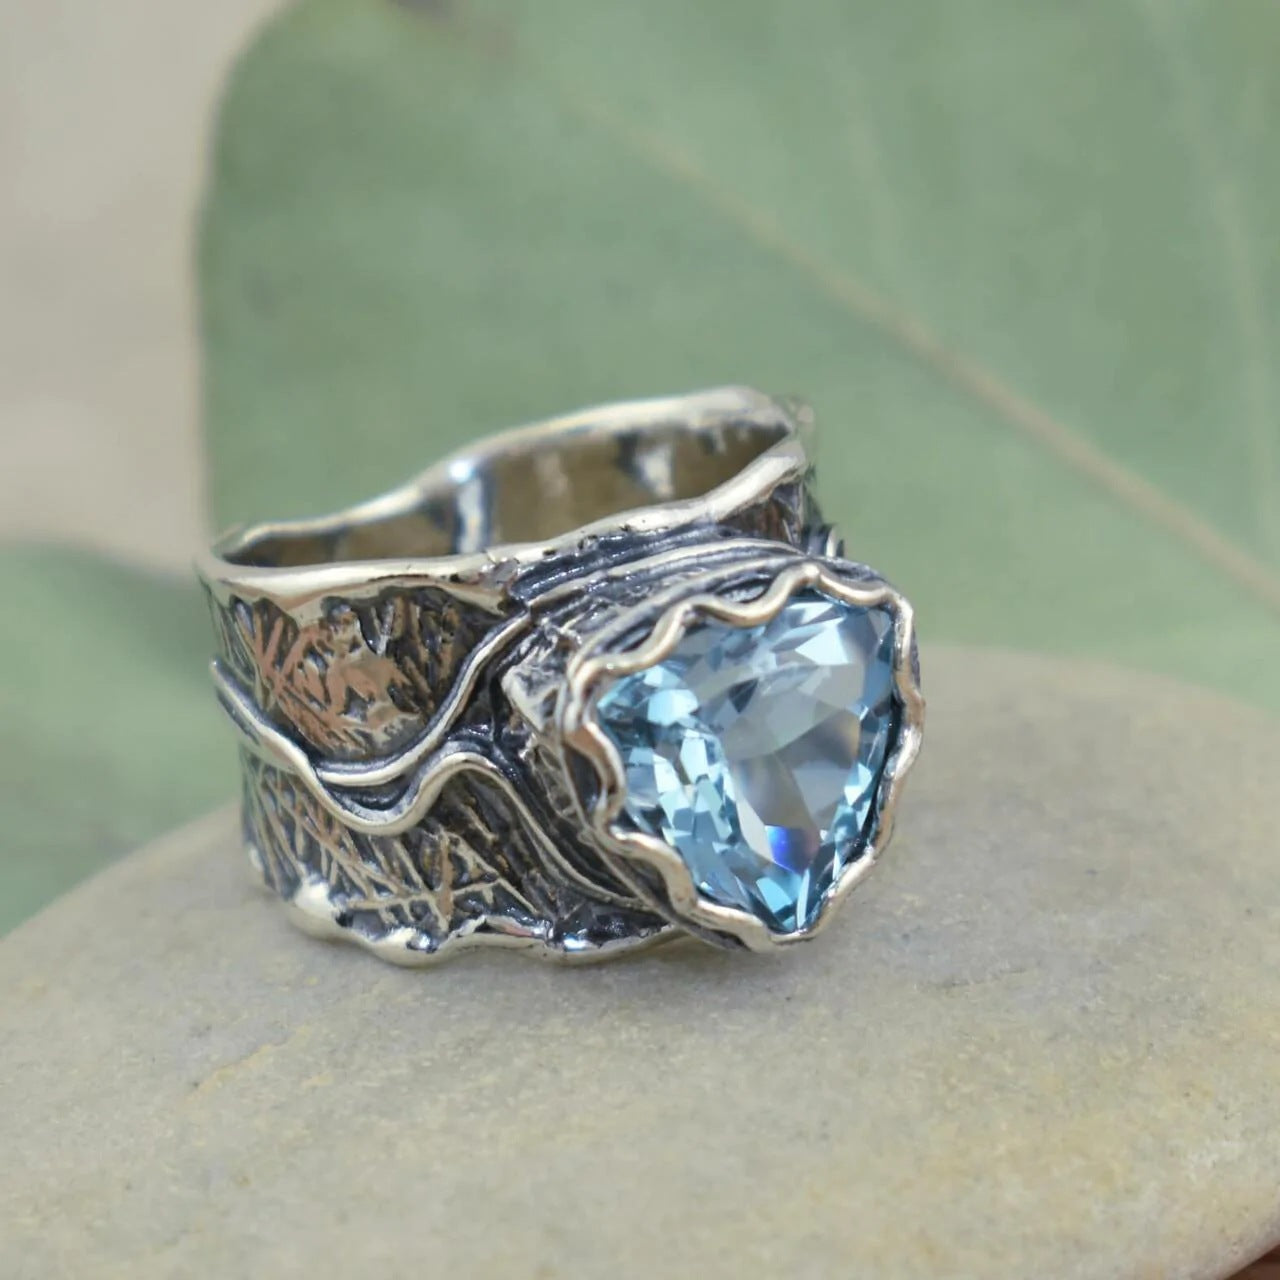 Alloy inlaid blue zircon creative ring for men and women-canovaniajewelry